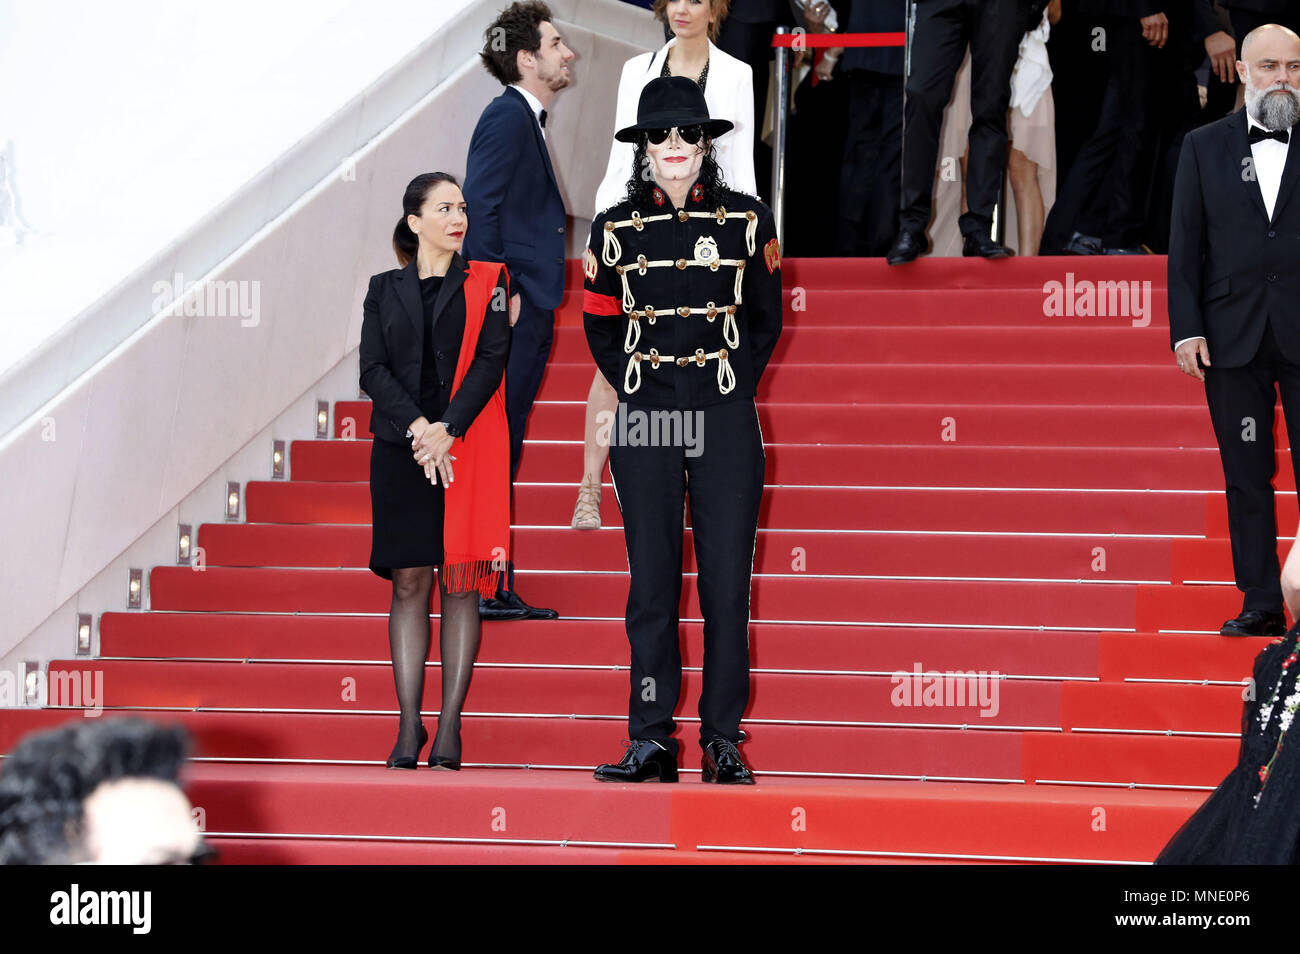 Michael Jackson Impersonator attending the 'Solo: A Star Wars Story' premiere during the 71st Cannes Film Festival at the Palais des Festivals on May 15, 2018 in Cannes, France | Verwendung weltweit Stock Photo